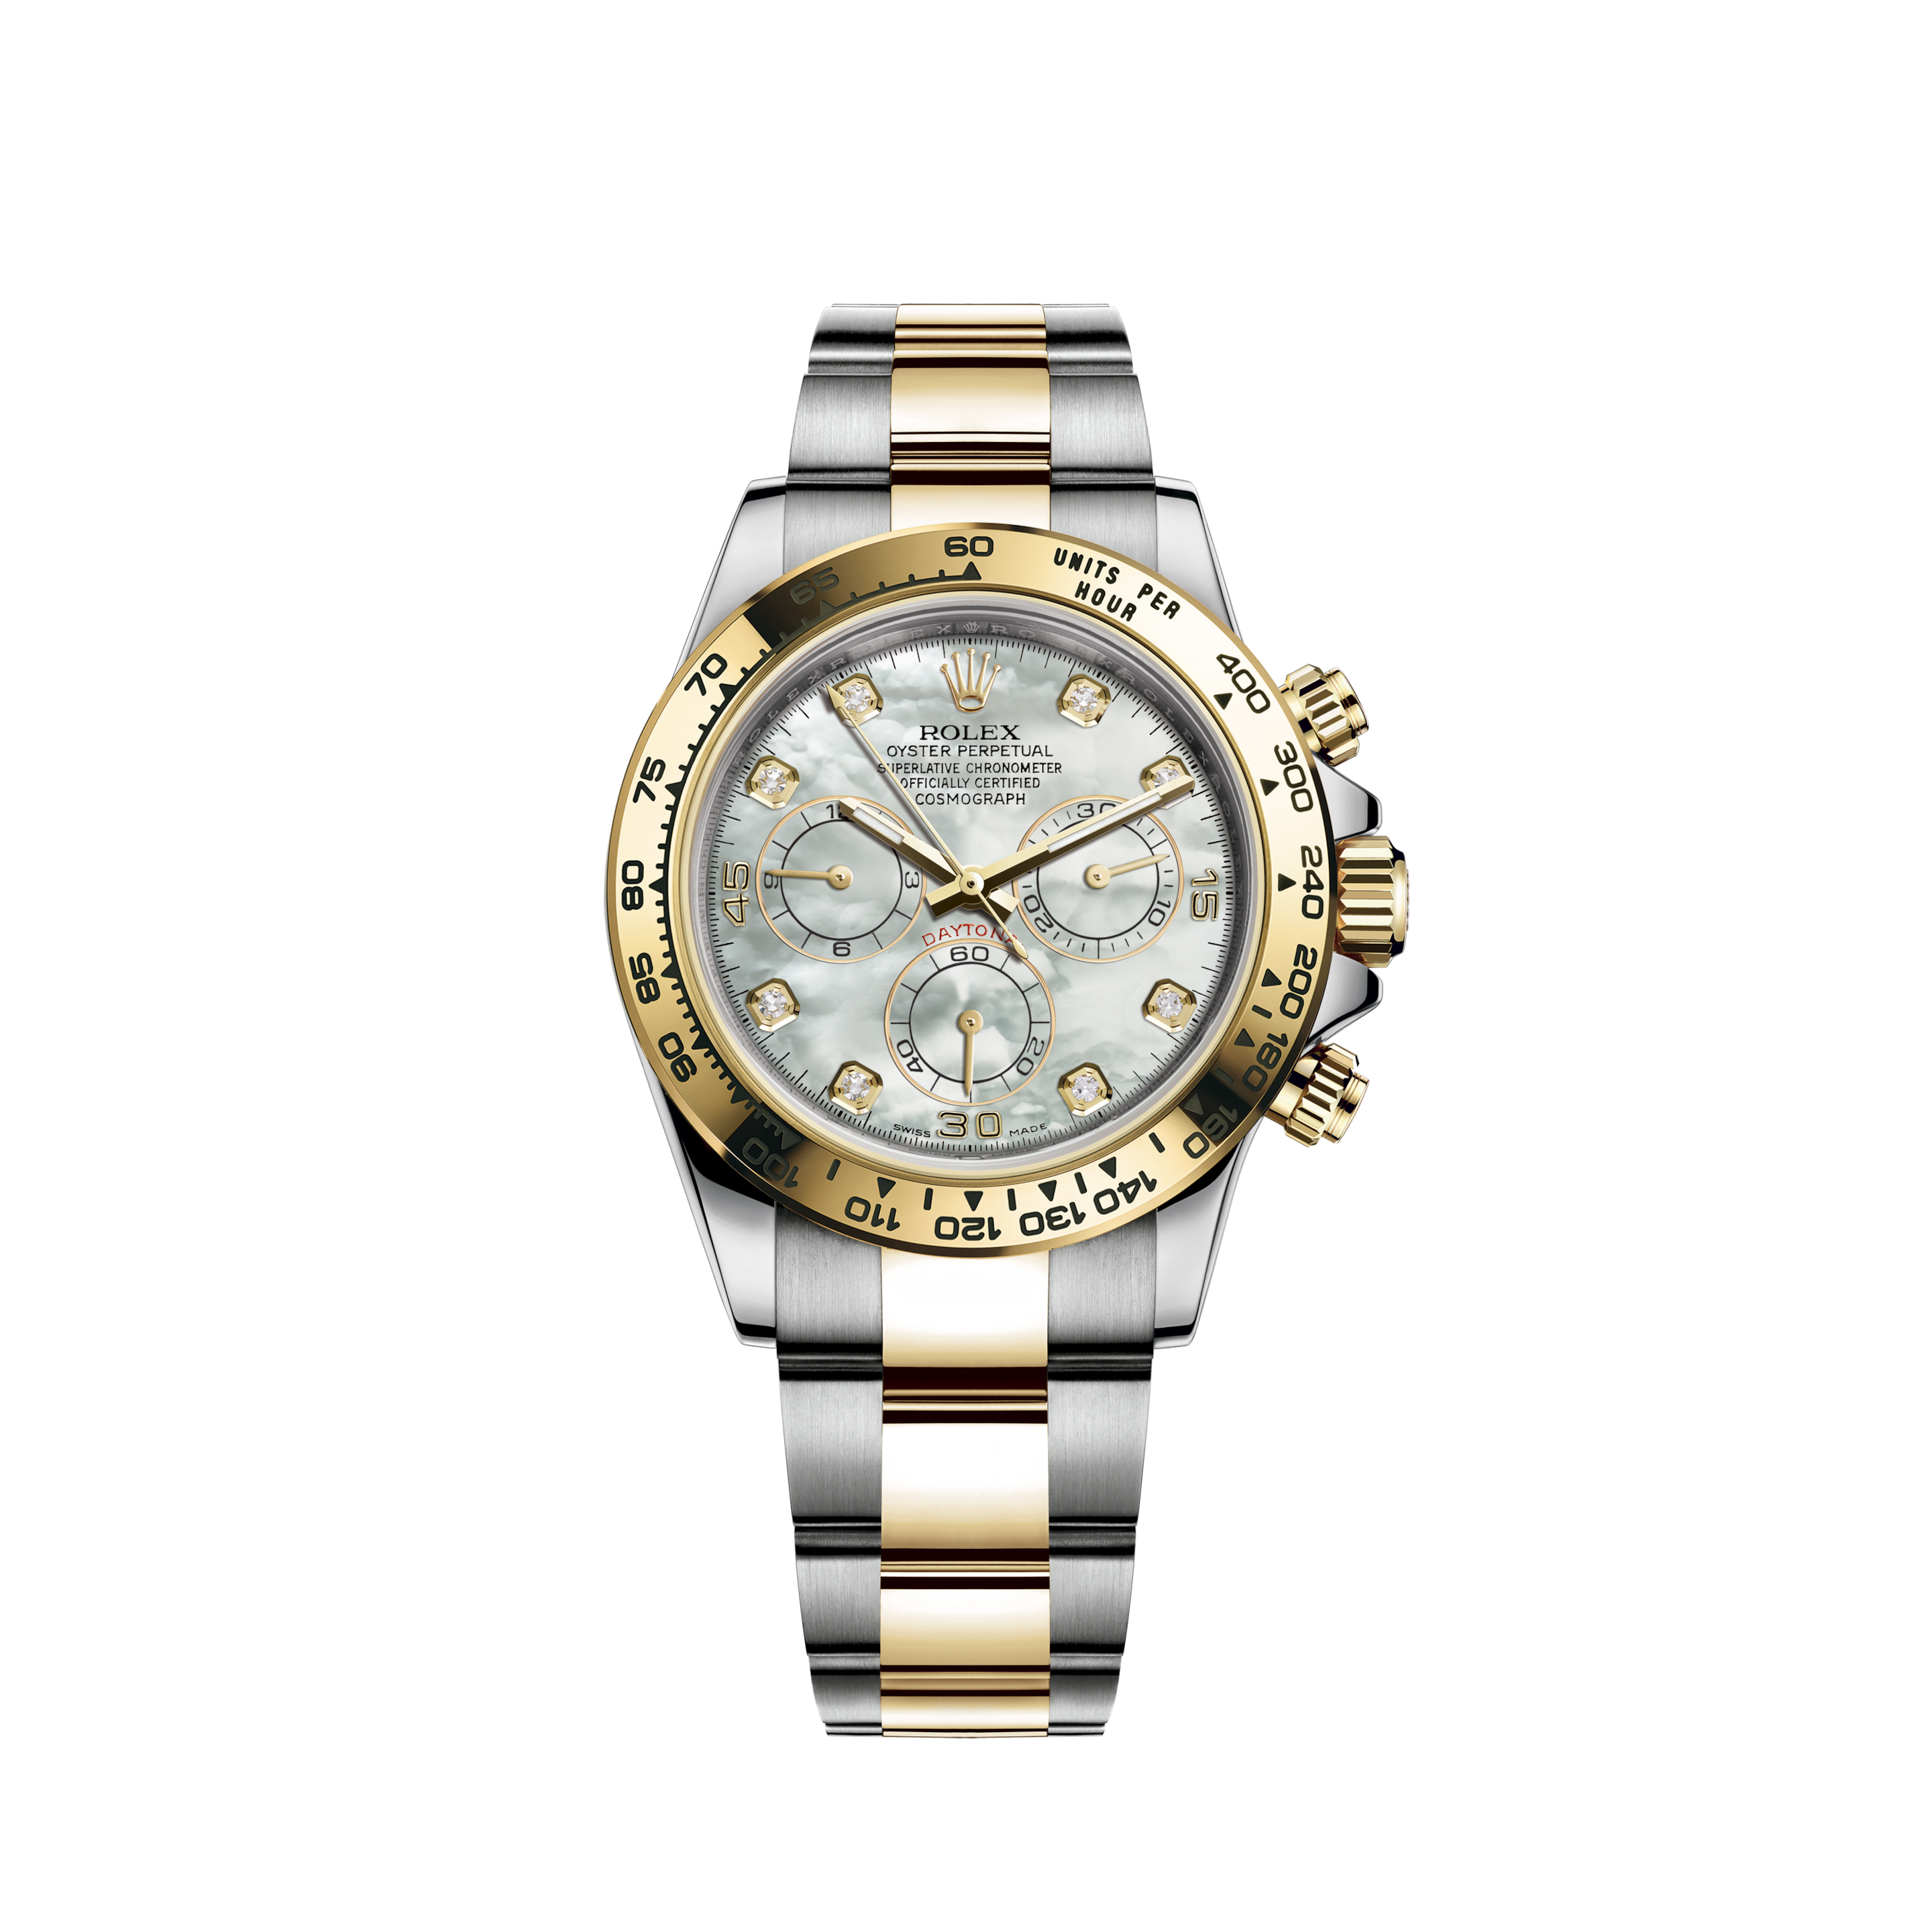 Rolex Lady-Datejust 26mm FullYellowGold GoldDial Jubillee(BOXonly1989)Rolex Pepsi GMT-Master II Unpolished with Papers P serial Ref 16710